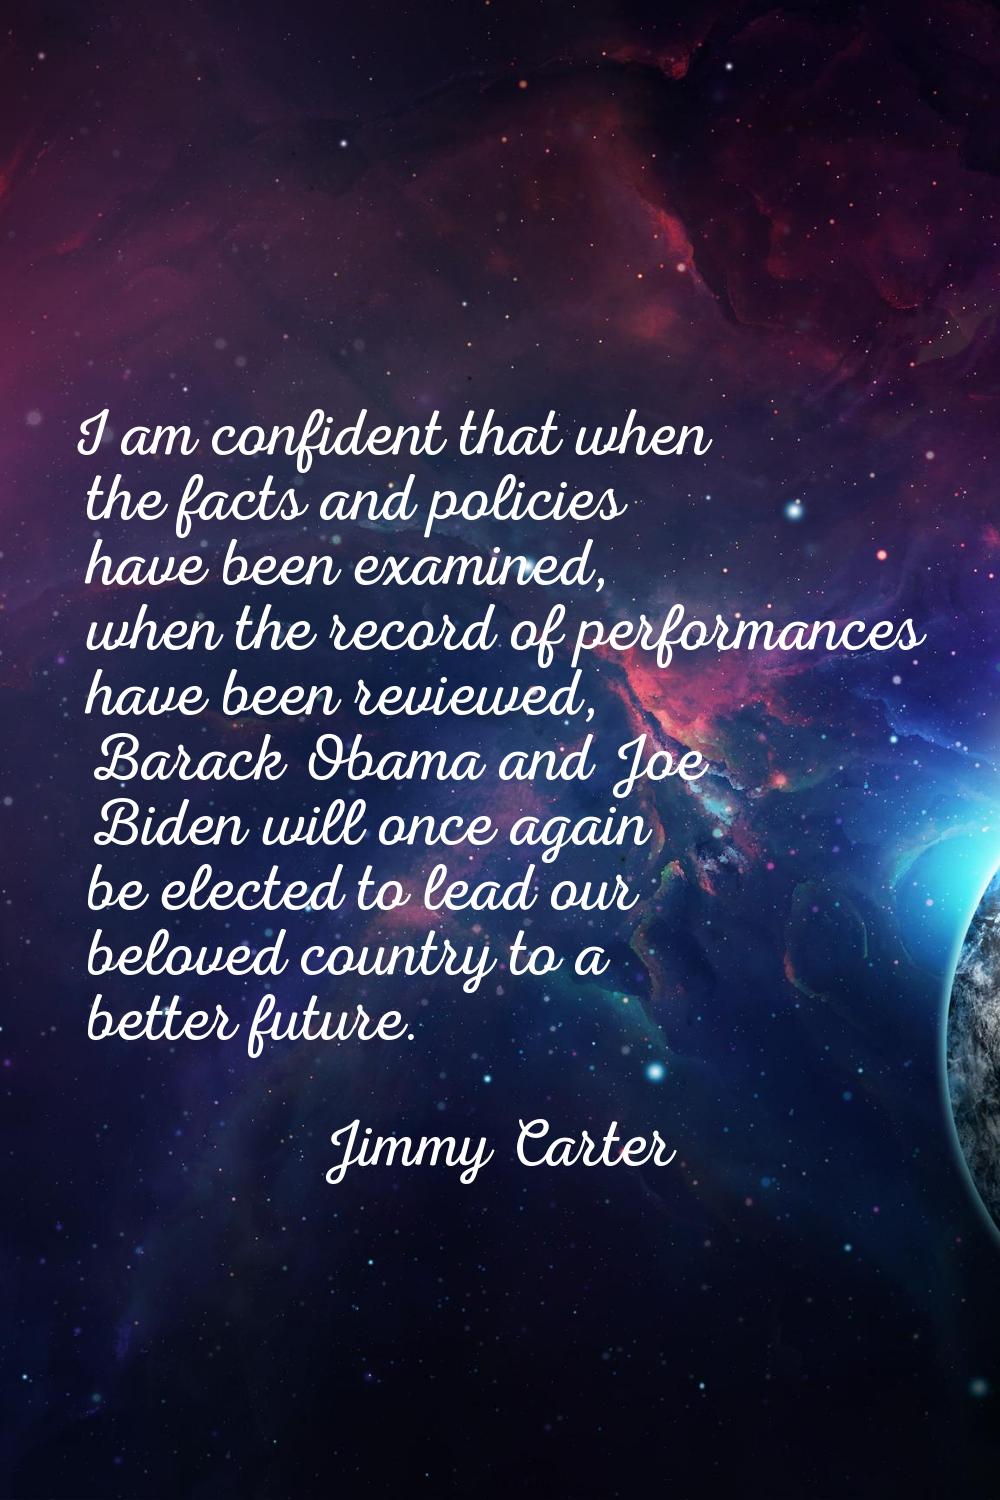 I am confident that when the facts and policies have been examined, when the record of performances